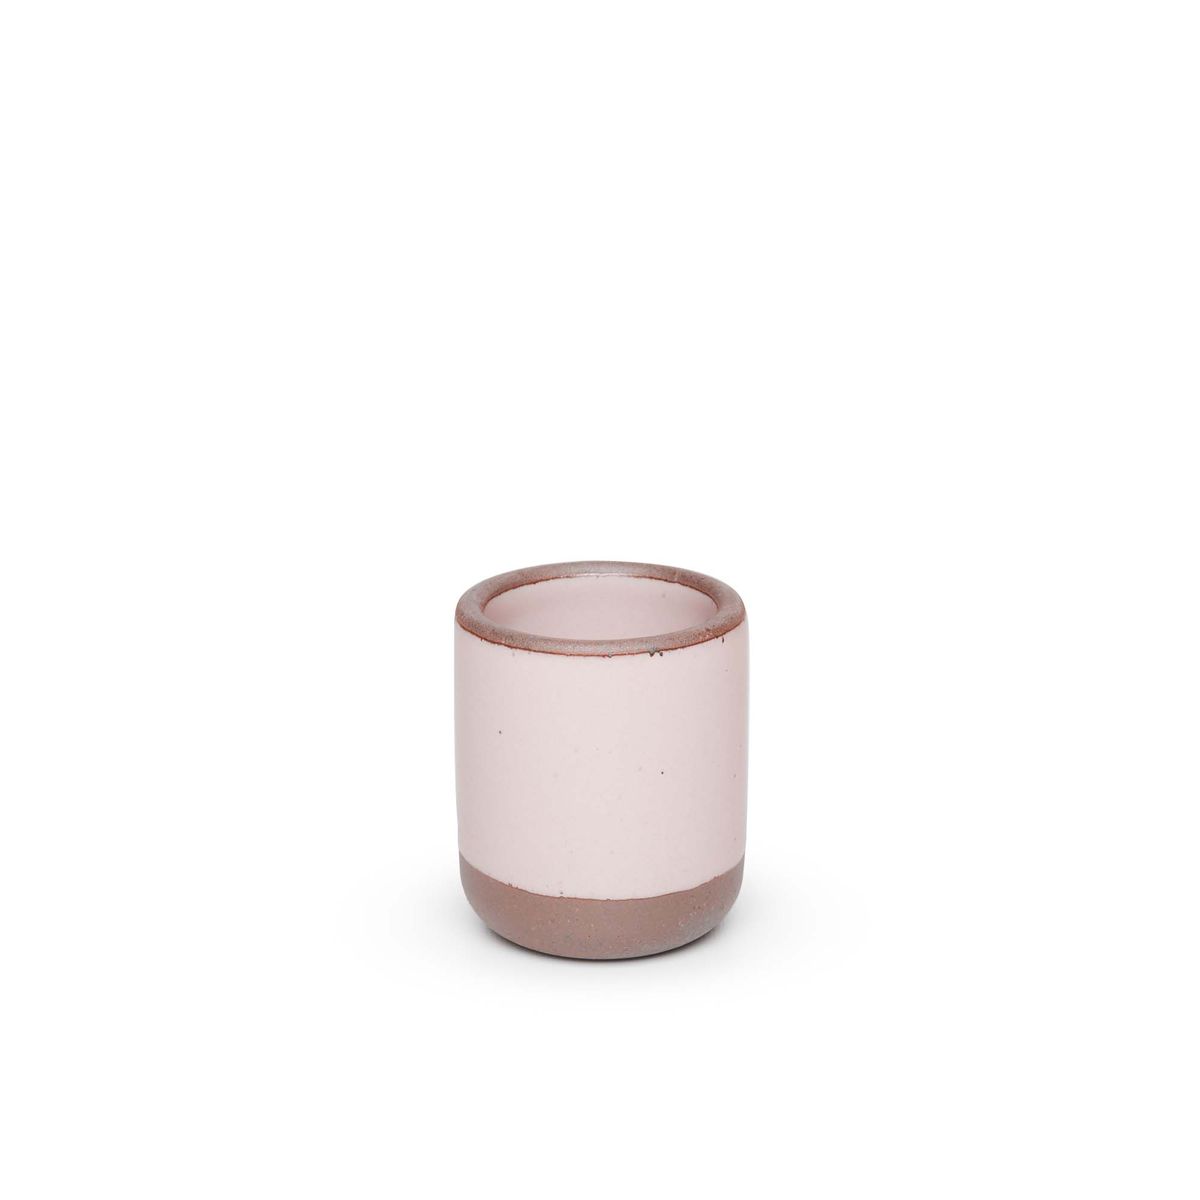 A small, short ceramic mug cup in a soft light pink color featuring iron speckles and unglazed rim and bottom base